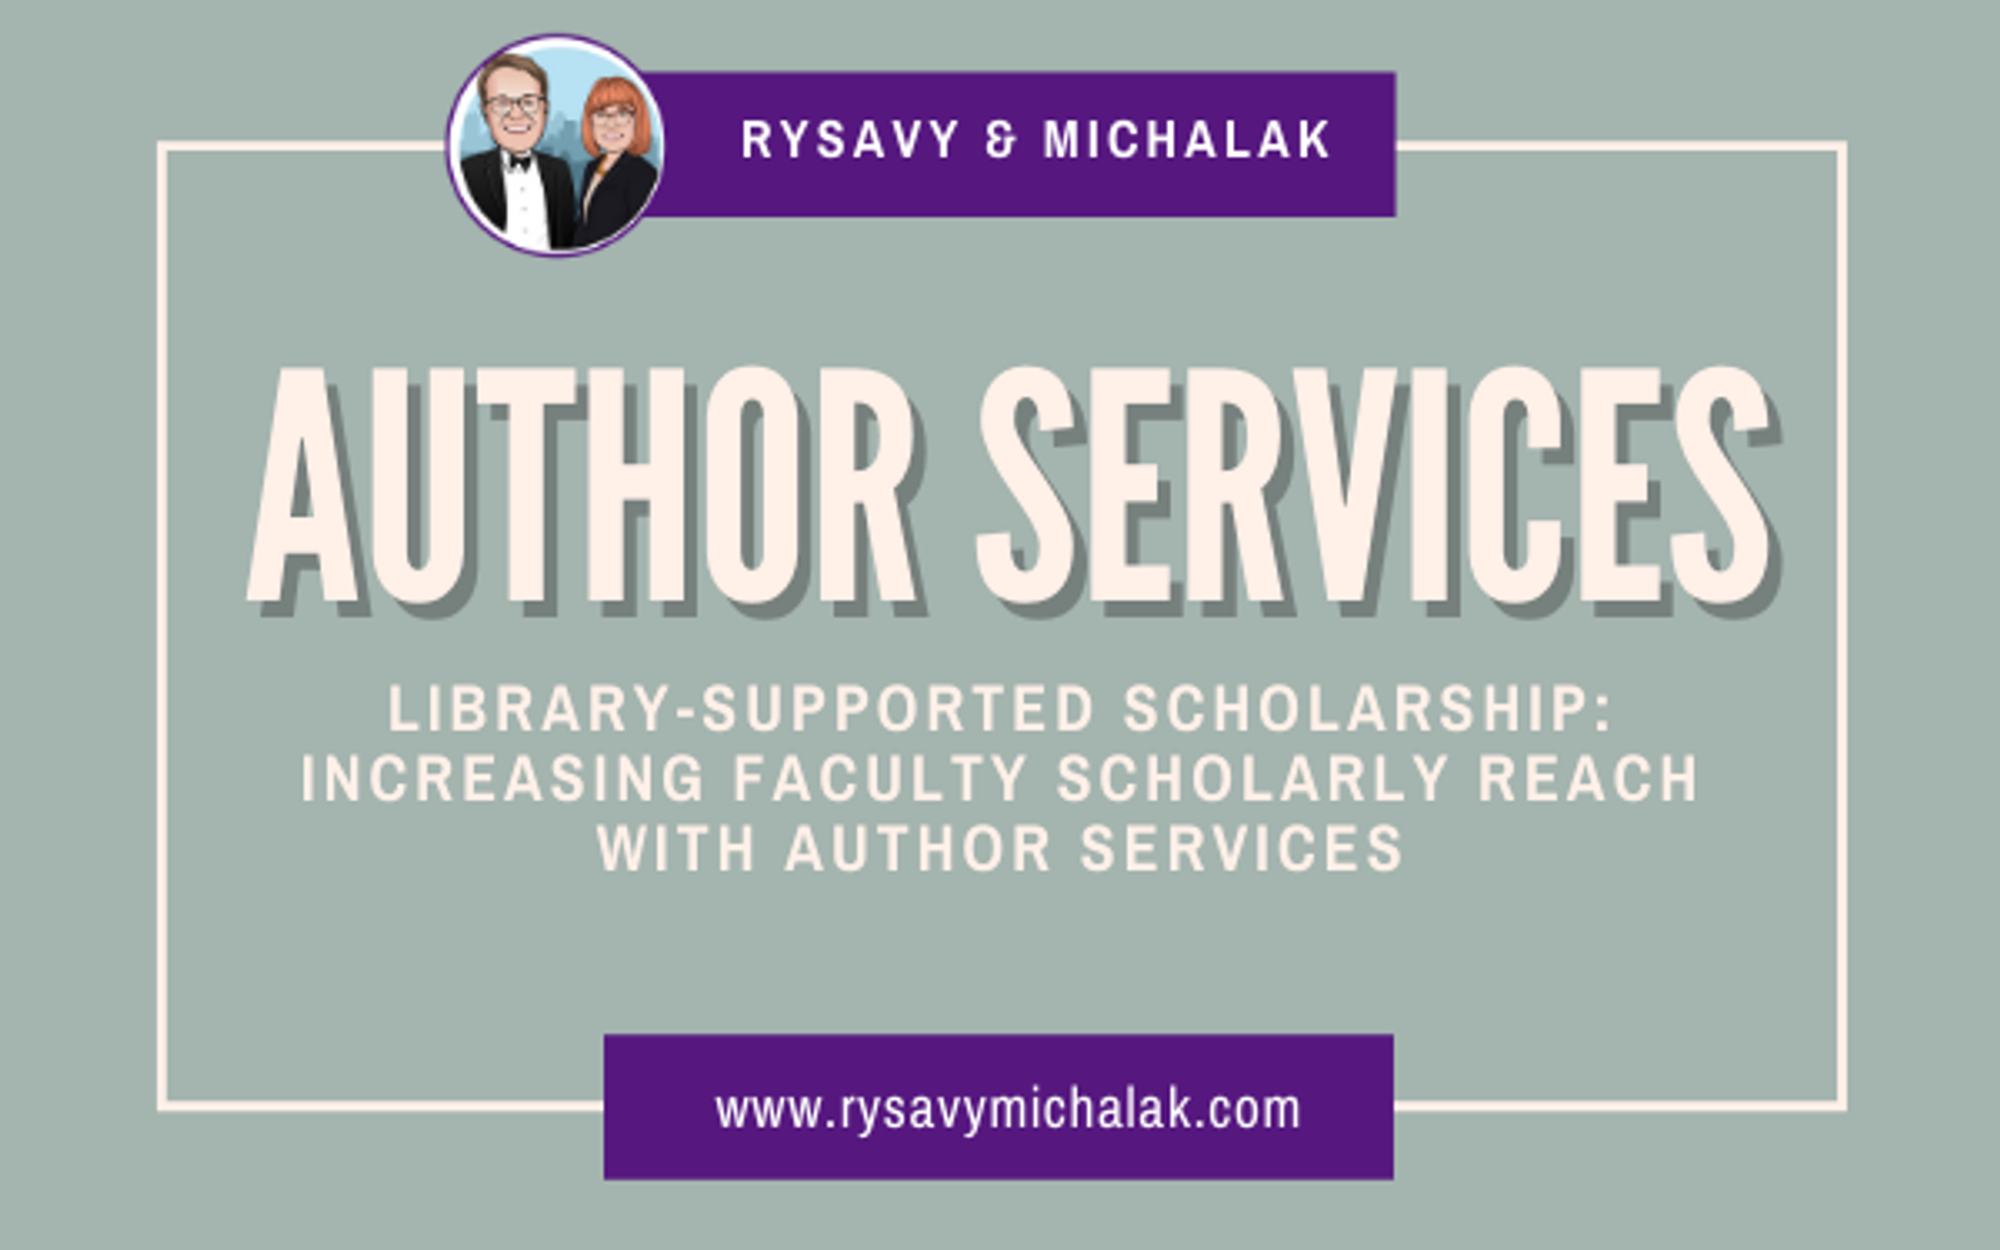 Library-Supported Scholarship: Increasing Faculty Scholarly Reach with Author Services